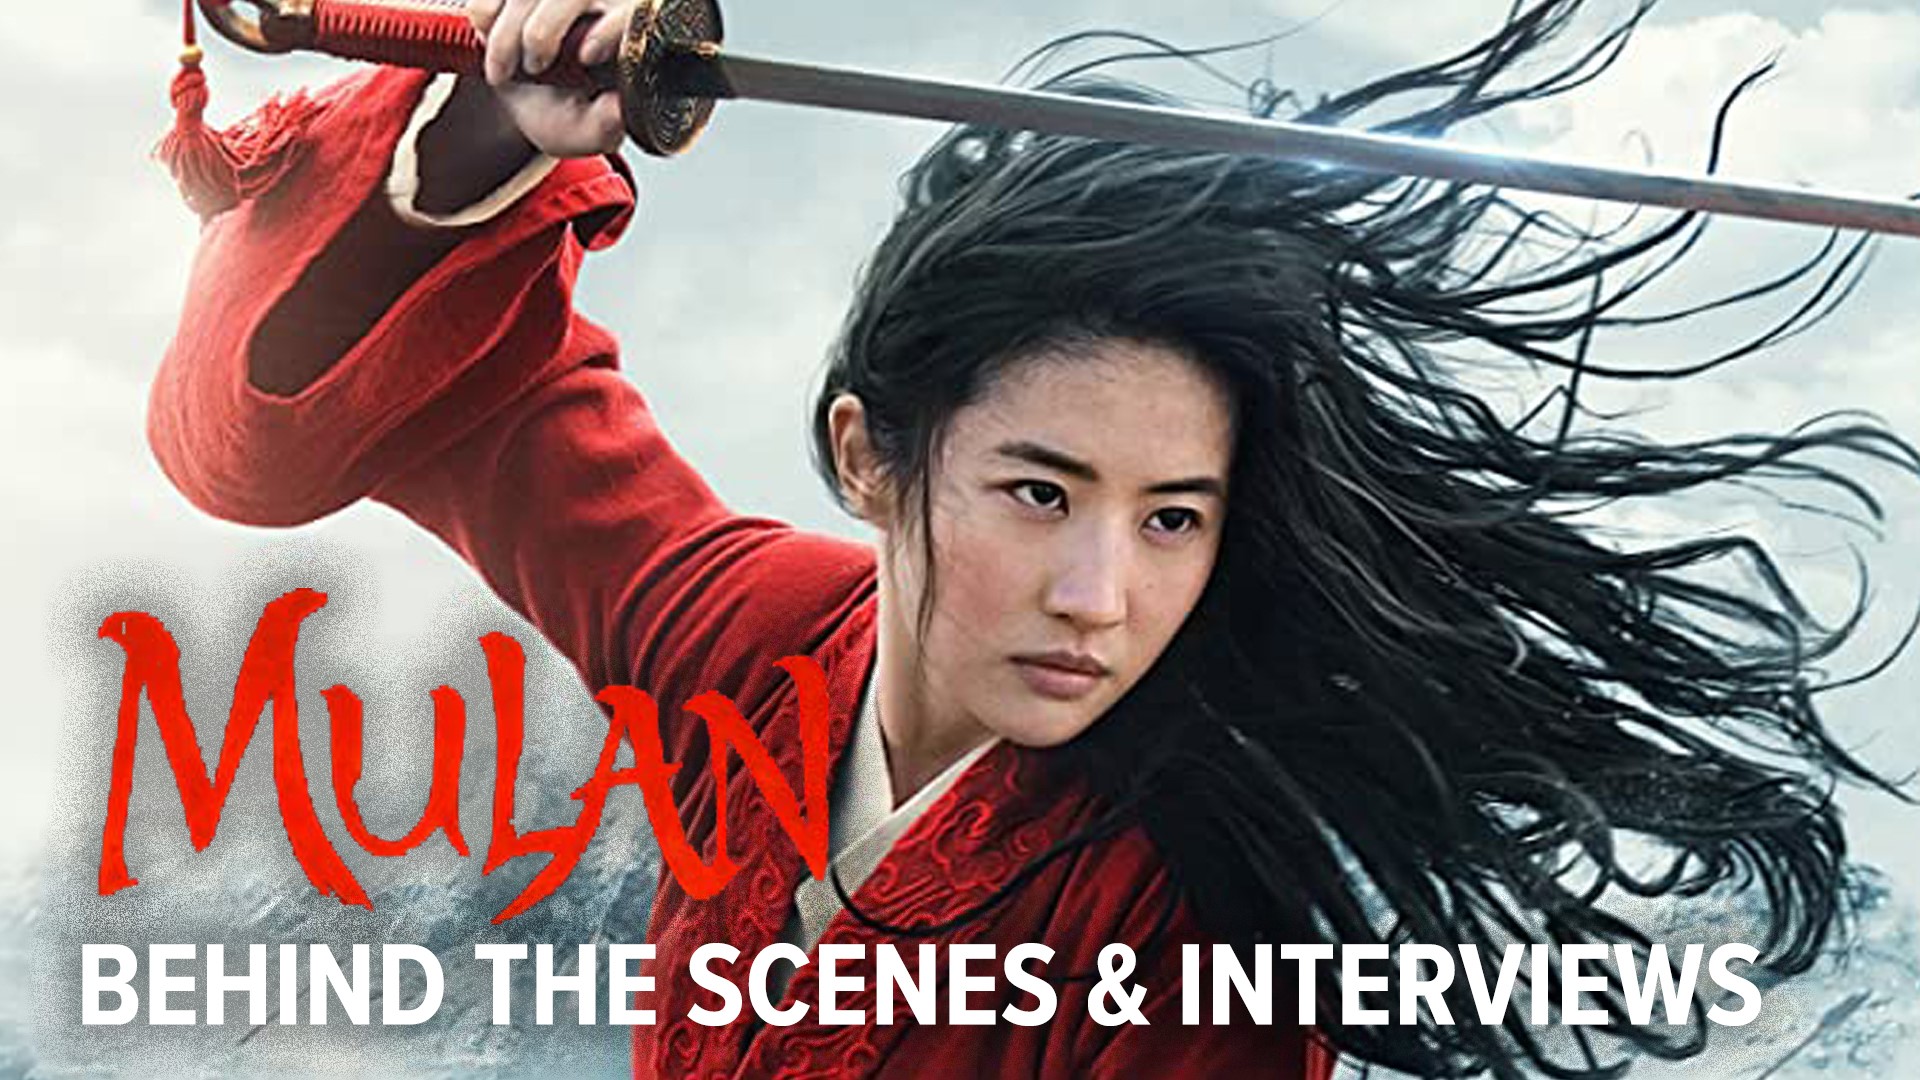 Go behind the scenes of the new live-action 'Mulan' movie coming to Disney+ and hear from the stars of the movie including Liu Yifei, Donnie Yen and Jet Li.